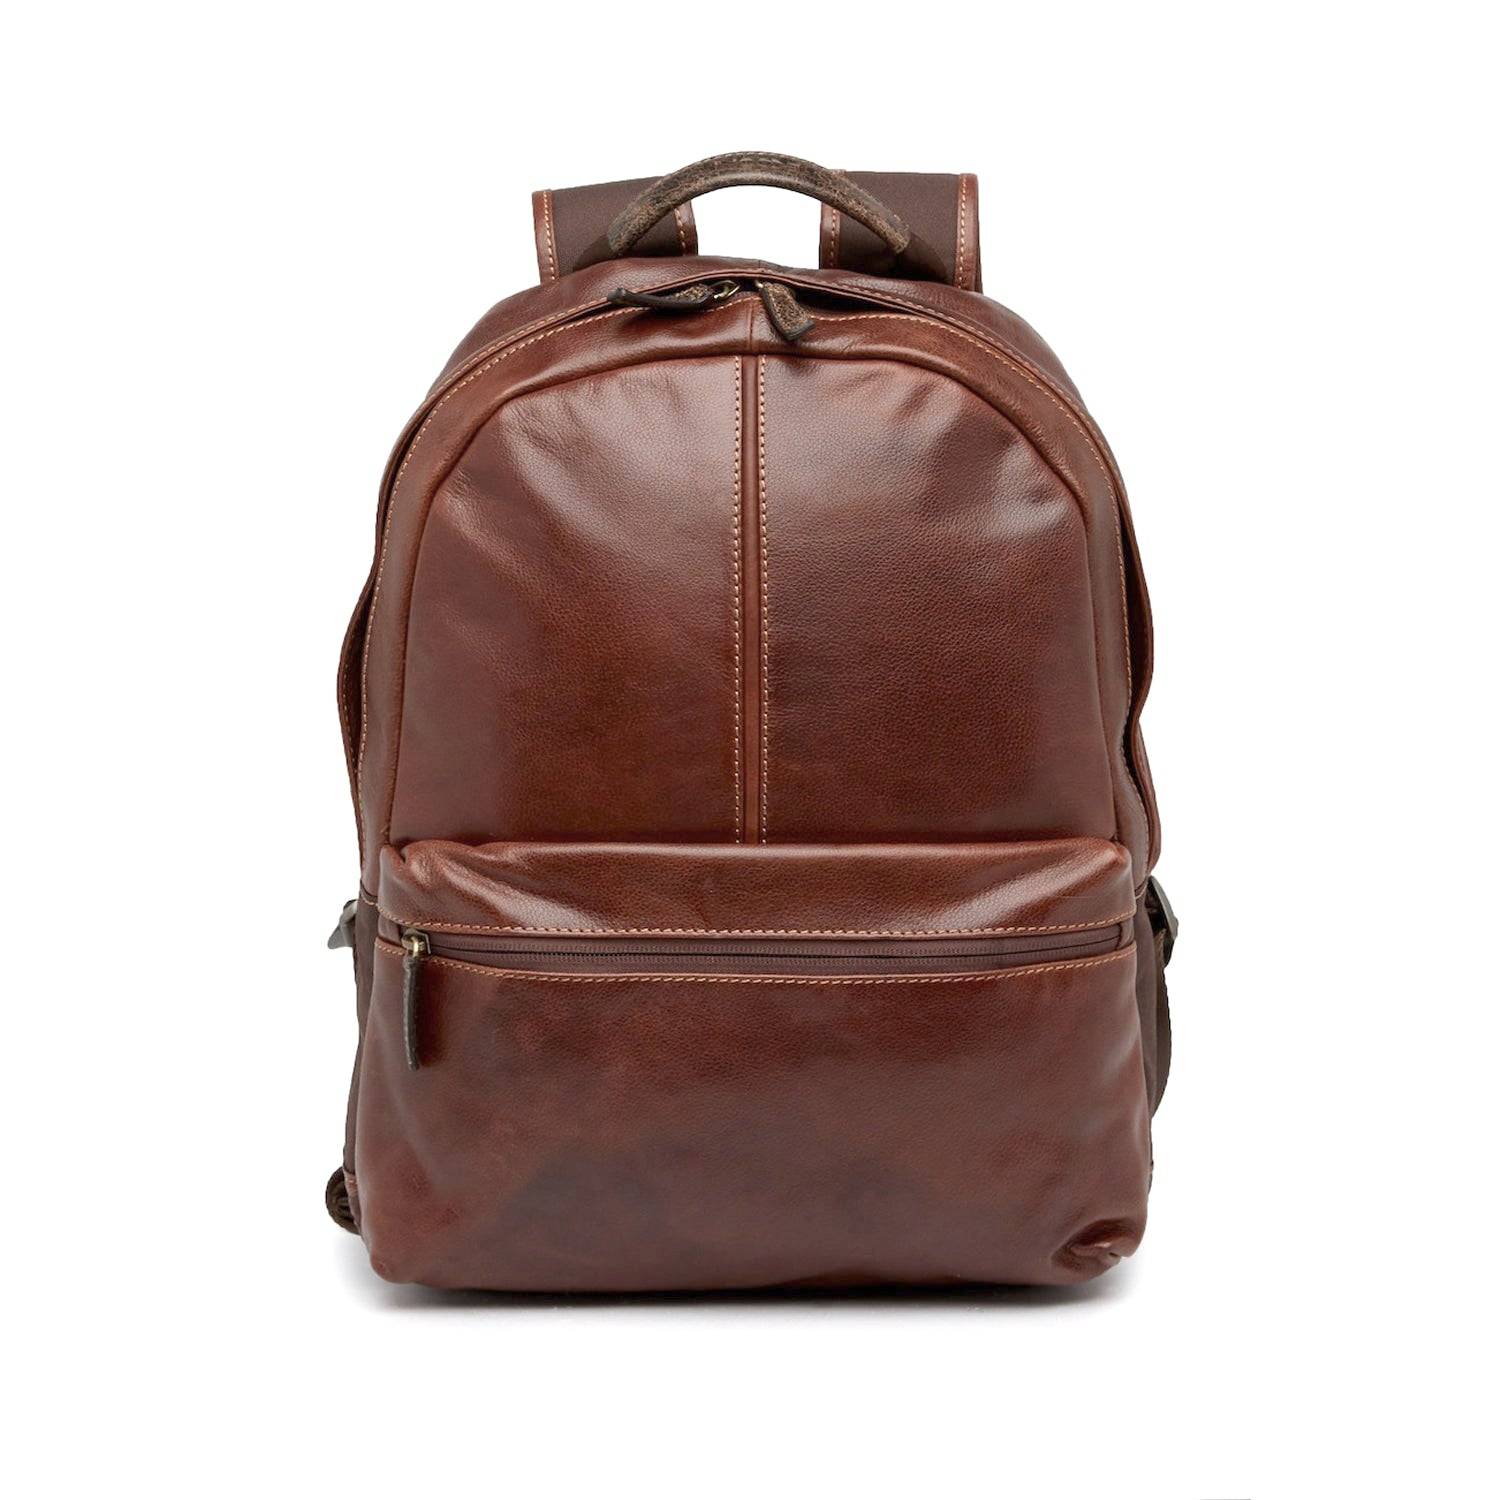 a brown leather backpack on a white background